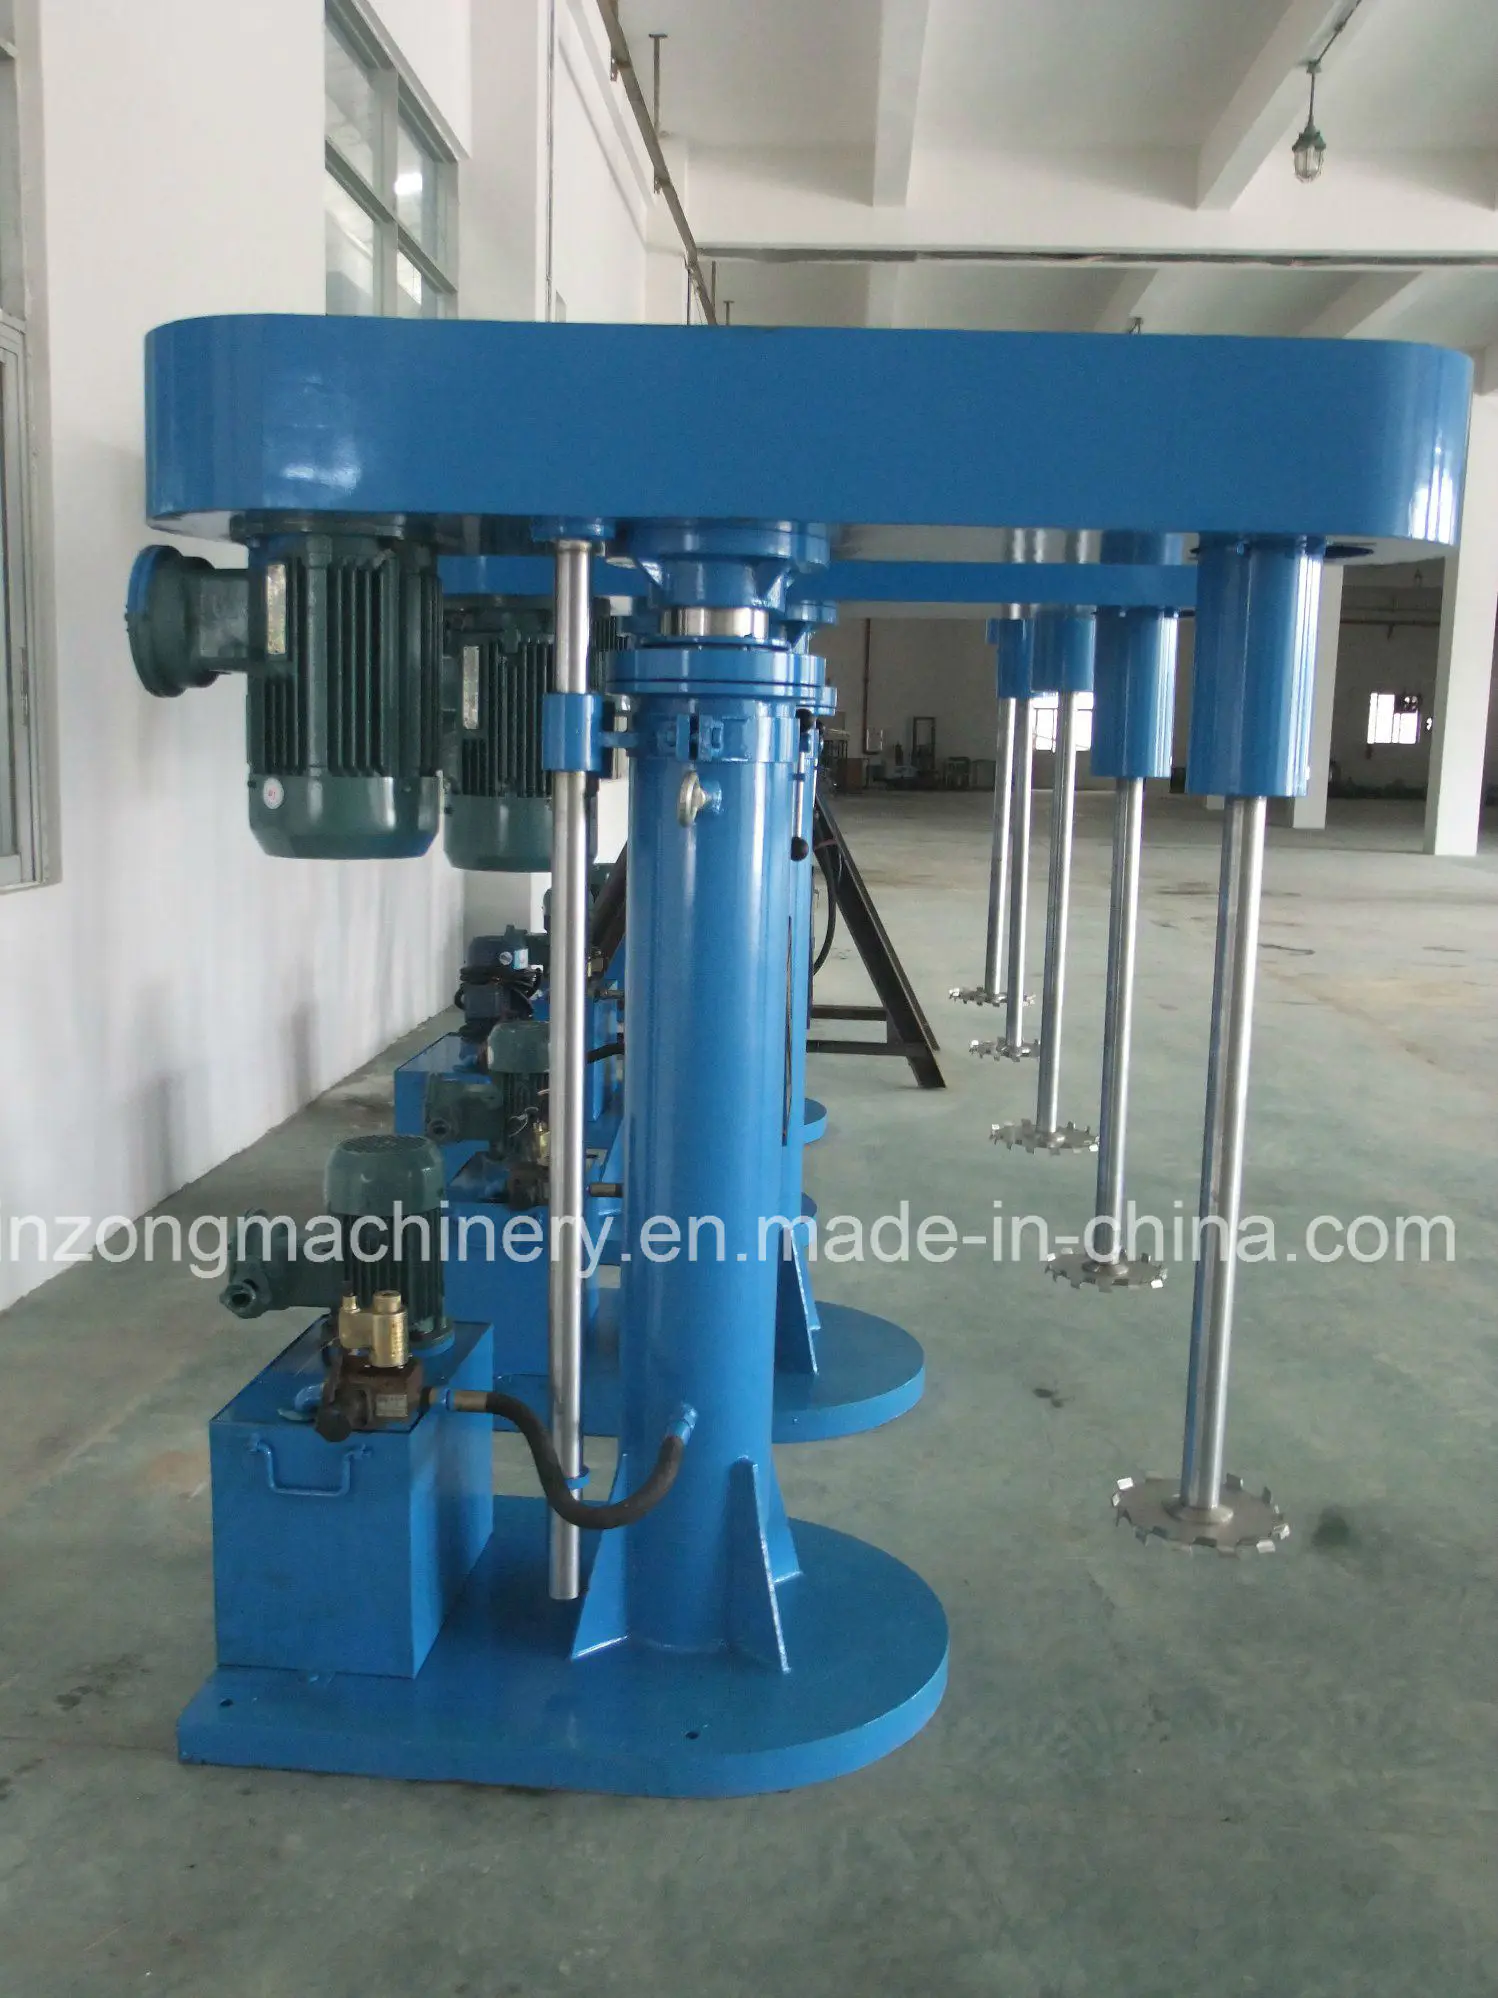 Hydraulic Lifting Dissolver Paint Mixer Making Machine for Interior&Exterior Wall Paint